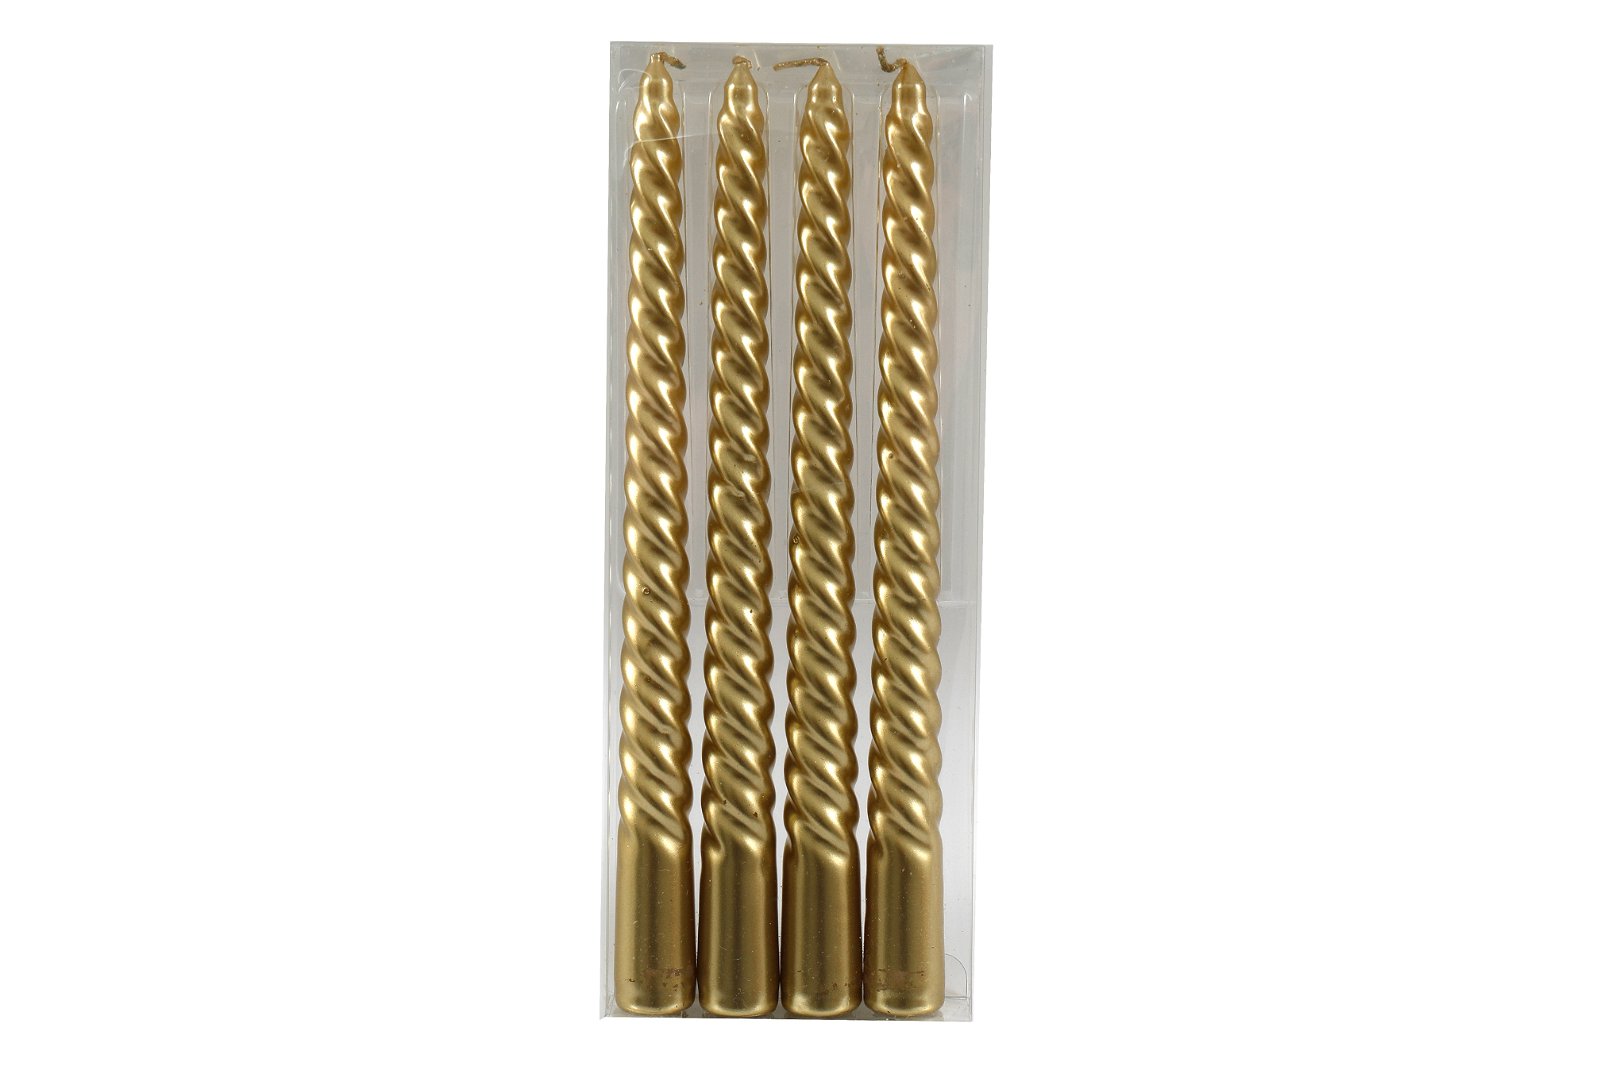 View Set of Four Gold Twist Taper Candles information